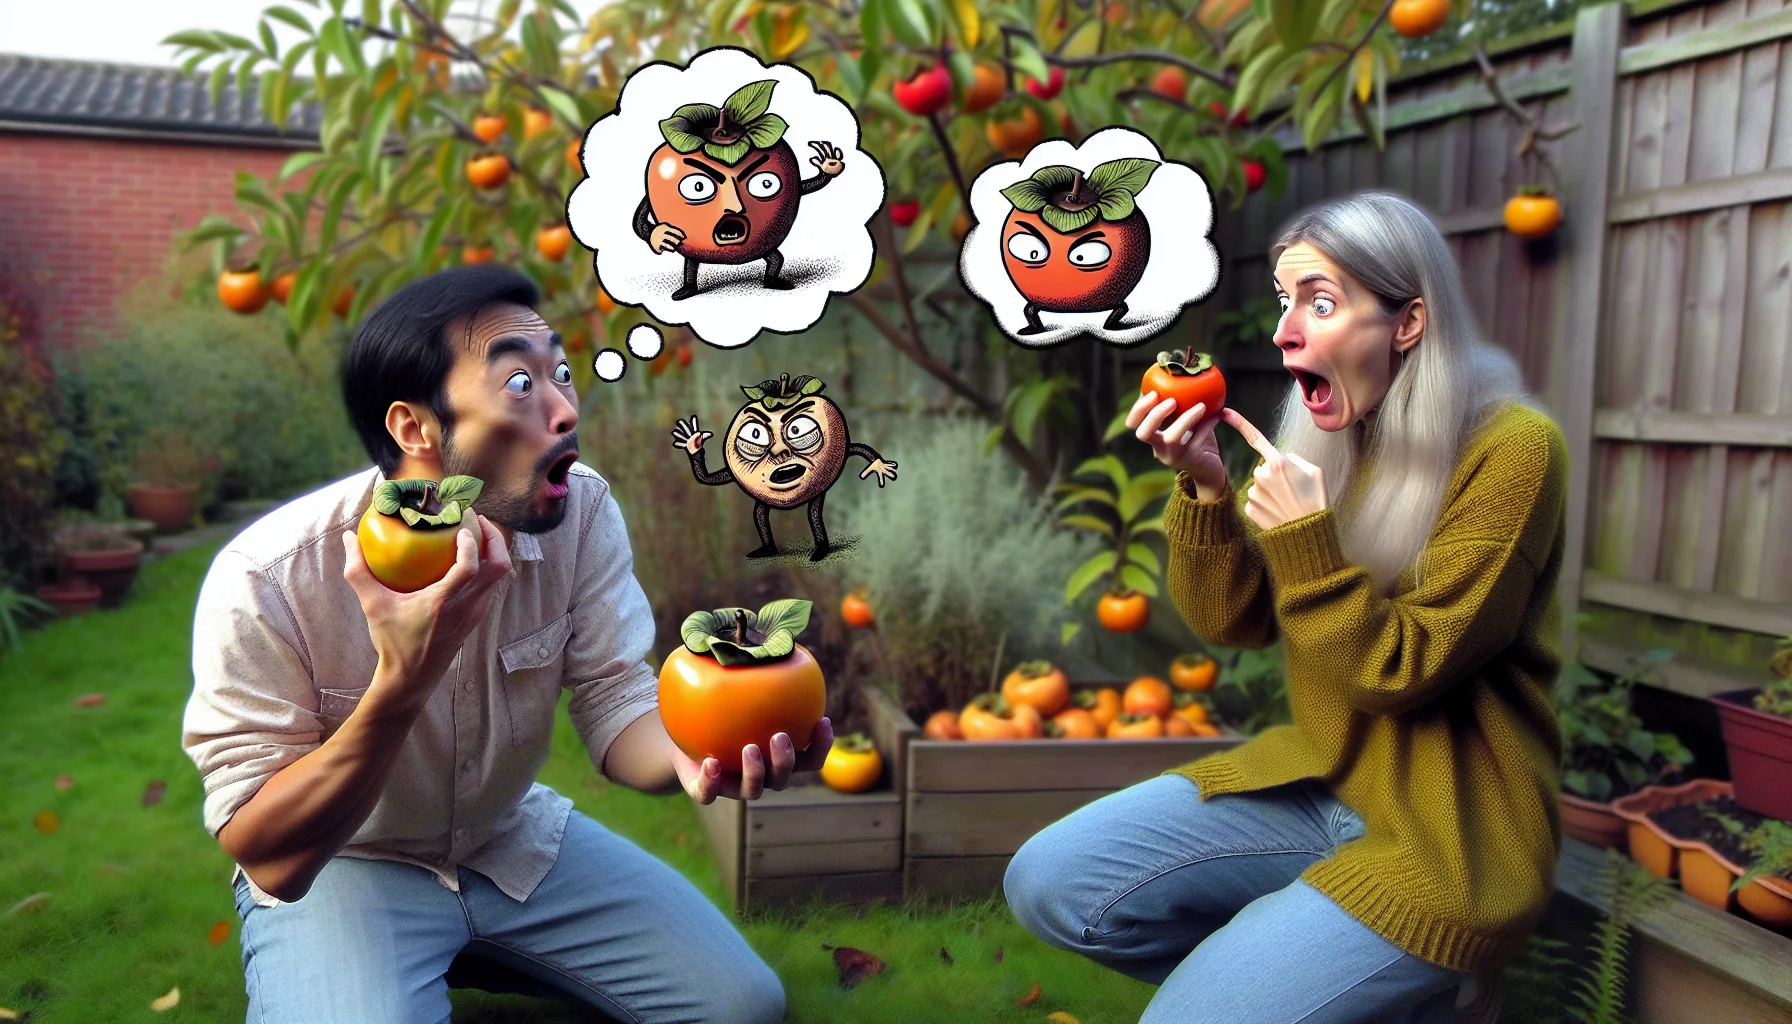 Generate a humorous image set in an outdoors garden scene. In the center are two animated characters with exaggerated facial expressions, one is a South Asian male holding a ripe persimmon fruit and the other is a Caucasian female pointing towards the persimmon with a suggestive grin. The male is shown hesitantly taking a small bite of the unpeeled persimmon while the female has a thought bubble appearing above her head with a sketch of a peeled and an unpeeled persimmon to show the contrast. The garden around them is lush and vibrant, filled with various fruit-bearing trees to evoke a sense of joy in gardening.